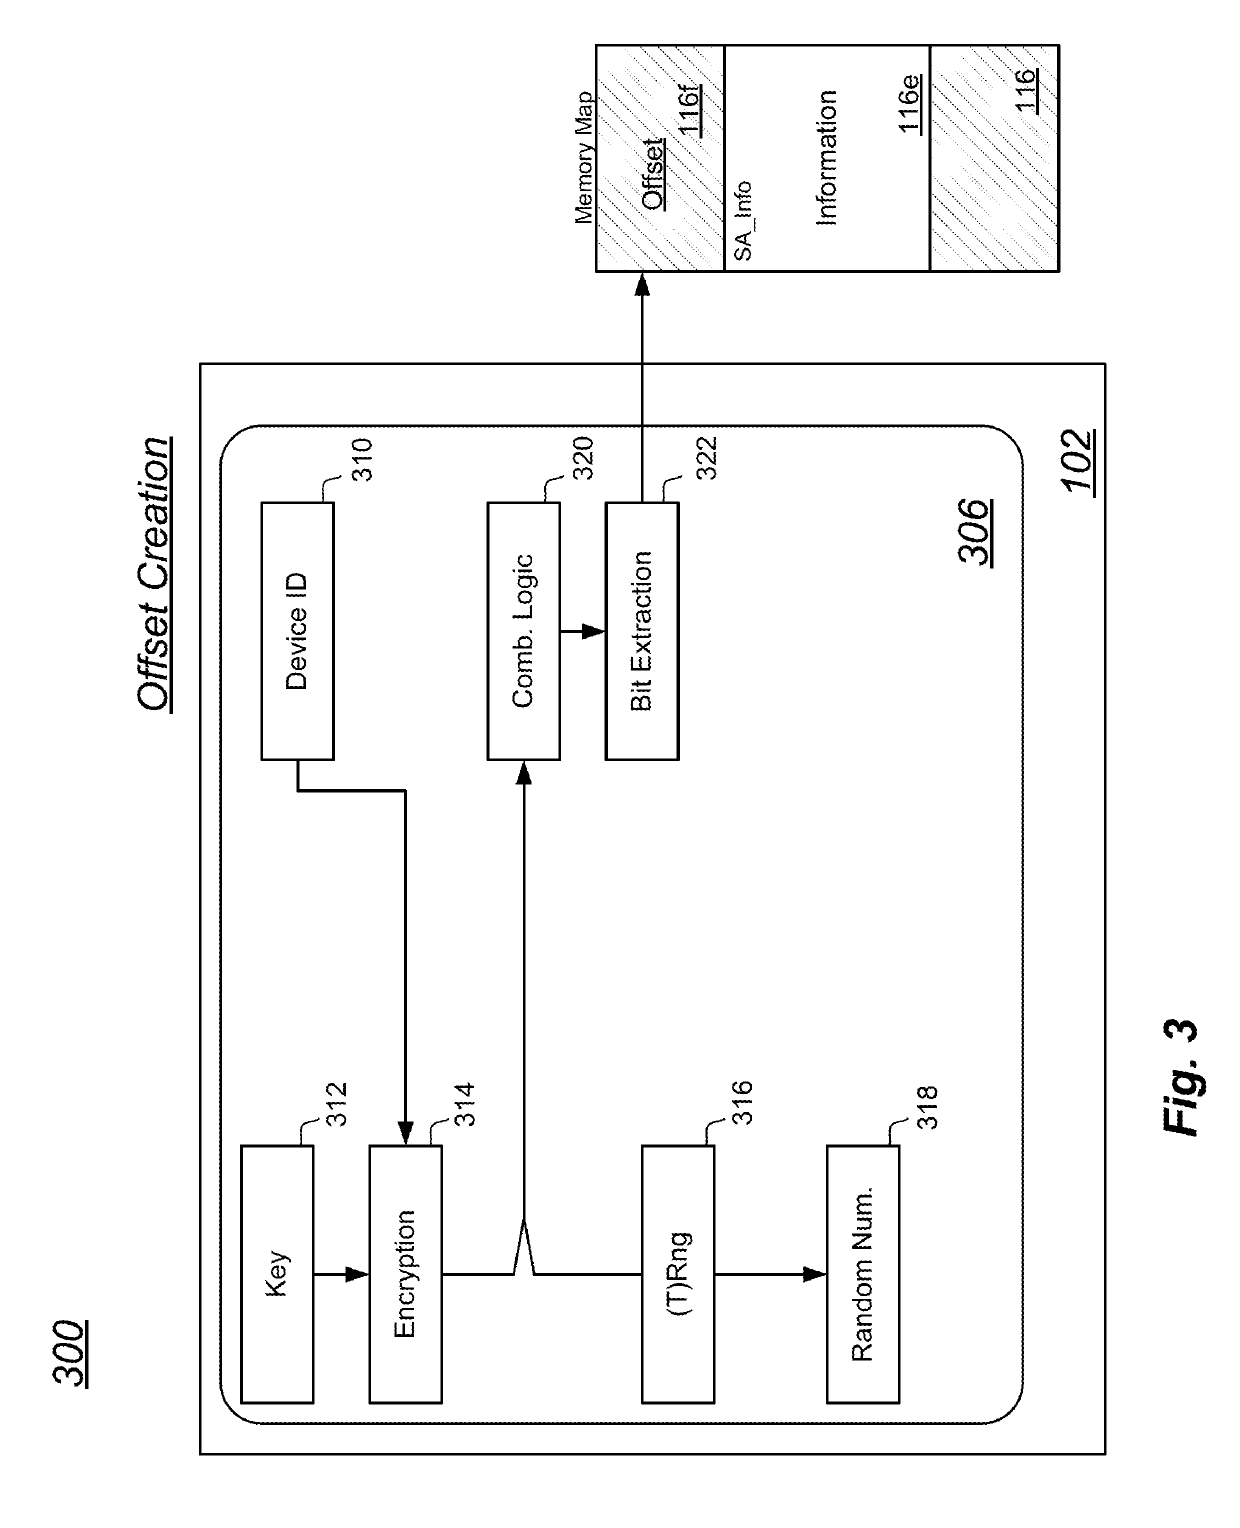 Secure firmware provisioning and device binding mechanism